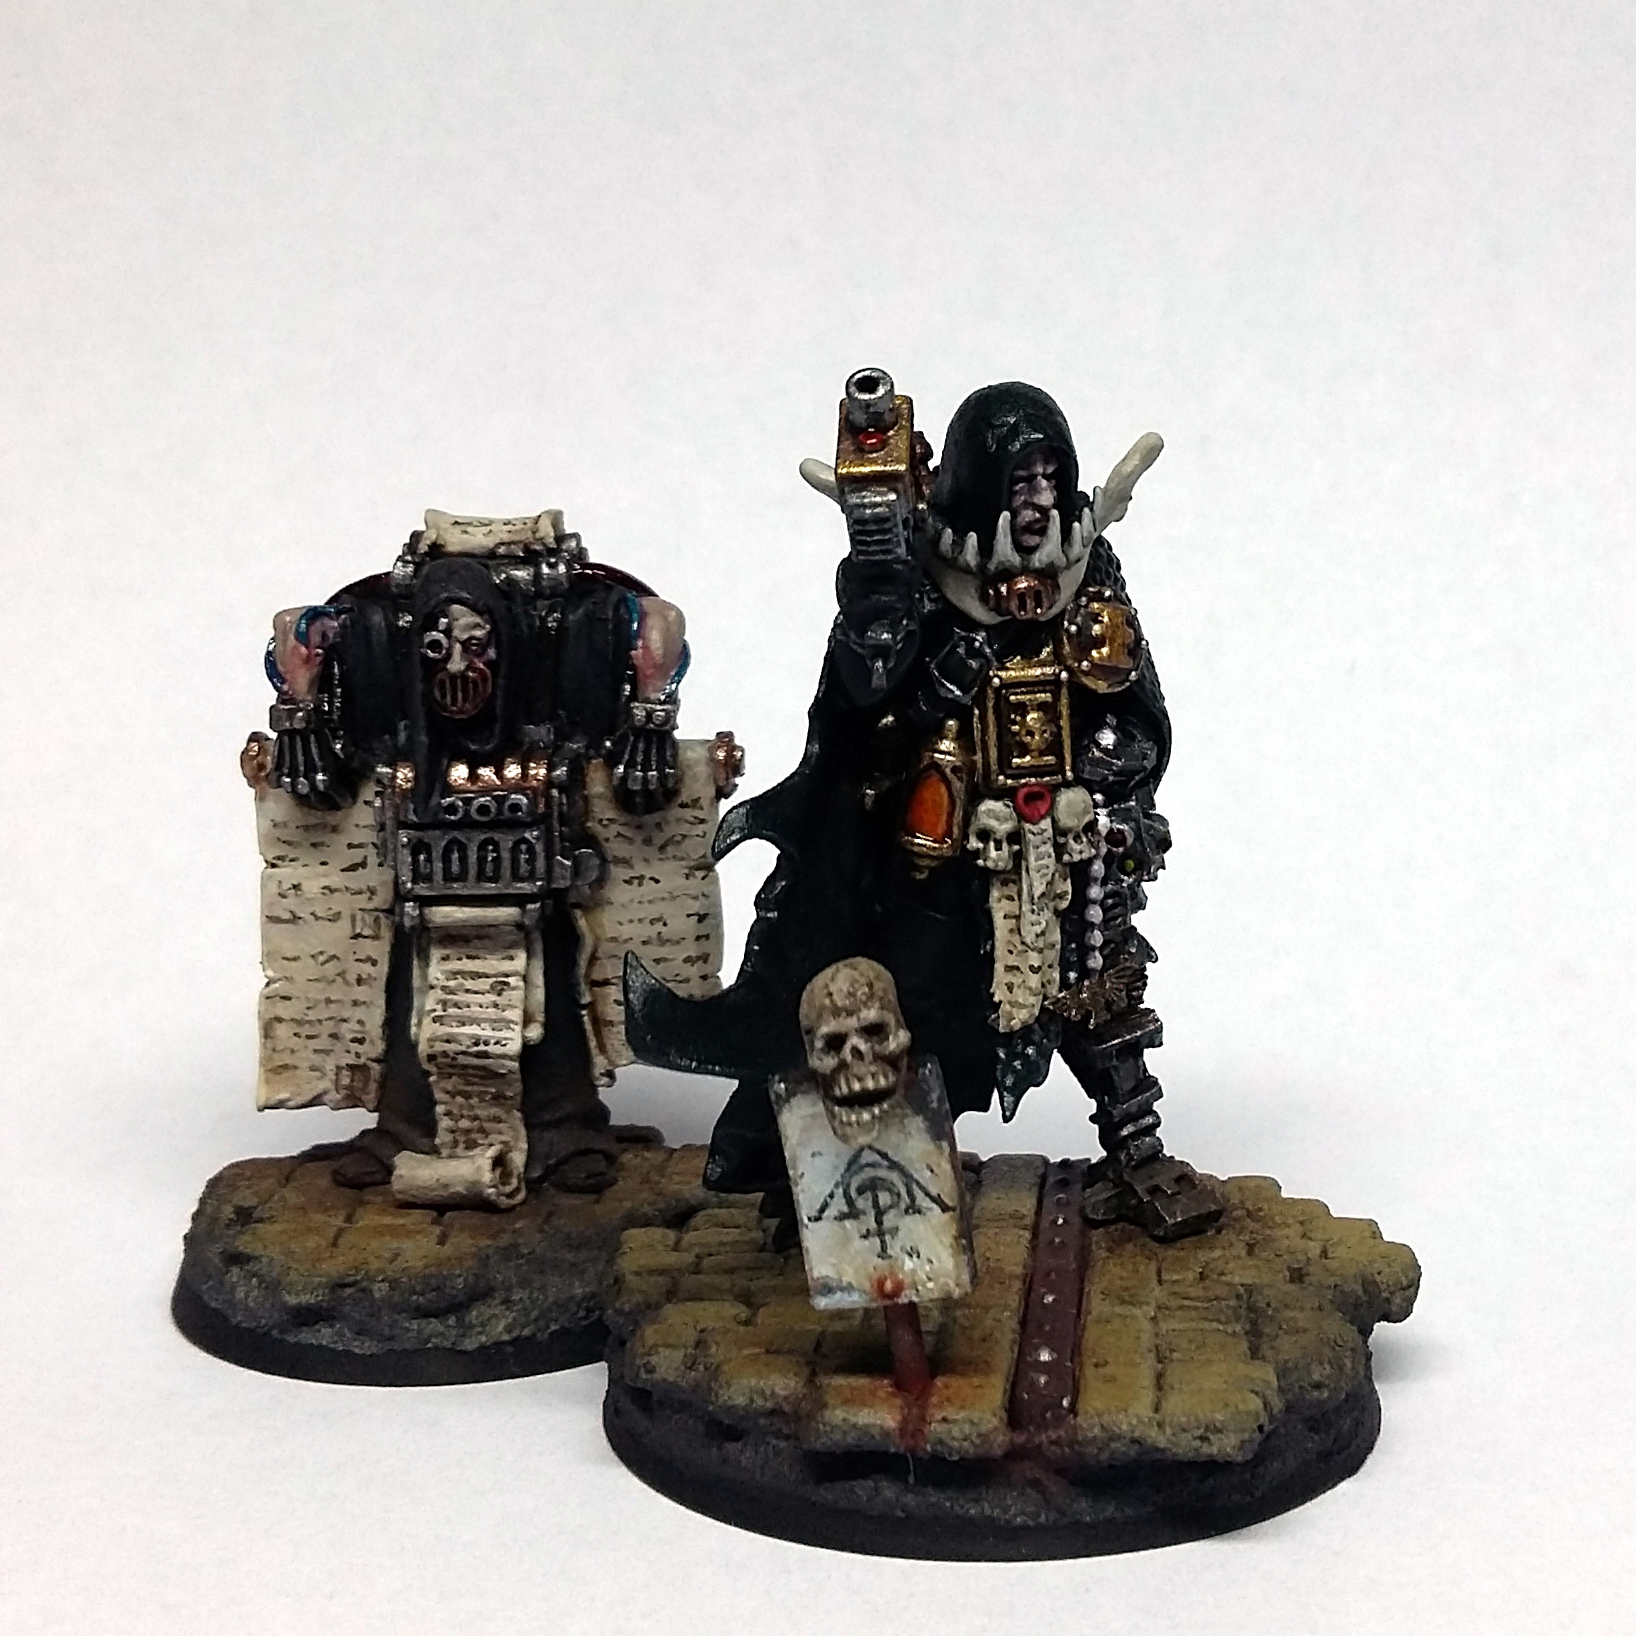 inquisitor-inson-and-scribe.jpg